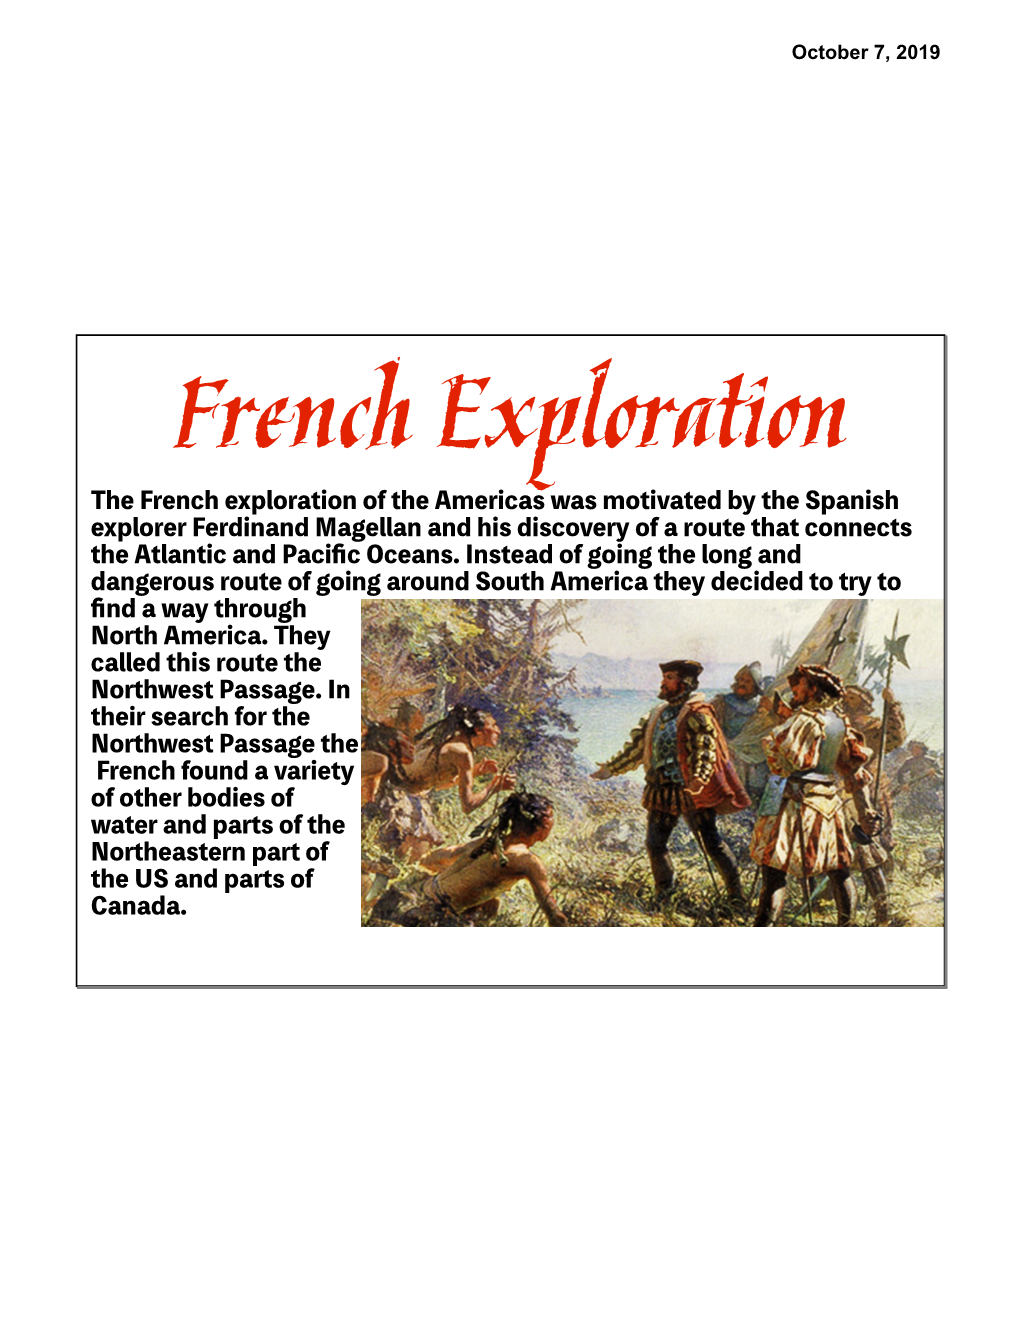 French Exploration